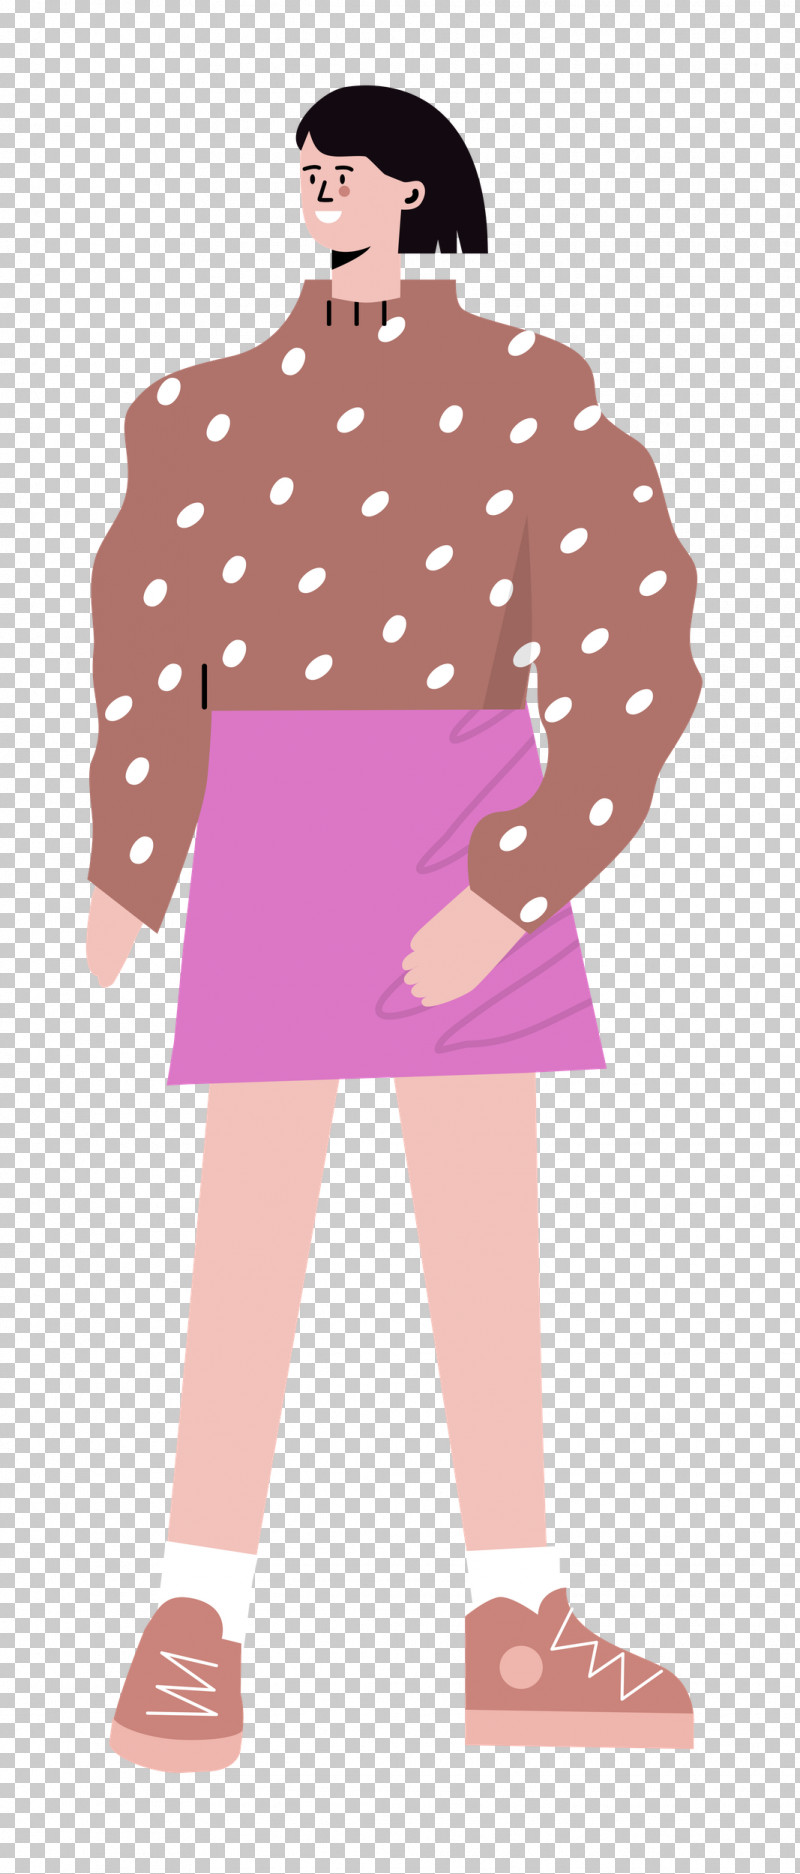 Standing Skirt Woman PNG, Clipart, Clothing, Color, Halftone, Polka Dot, Royaltyfree Free PNG Download